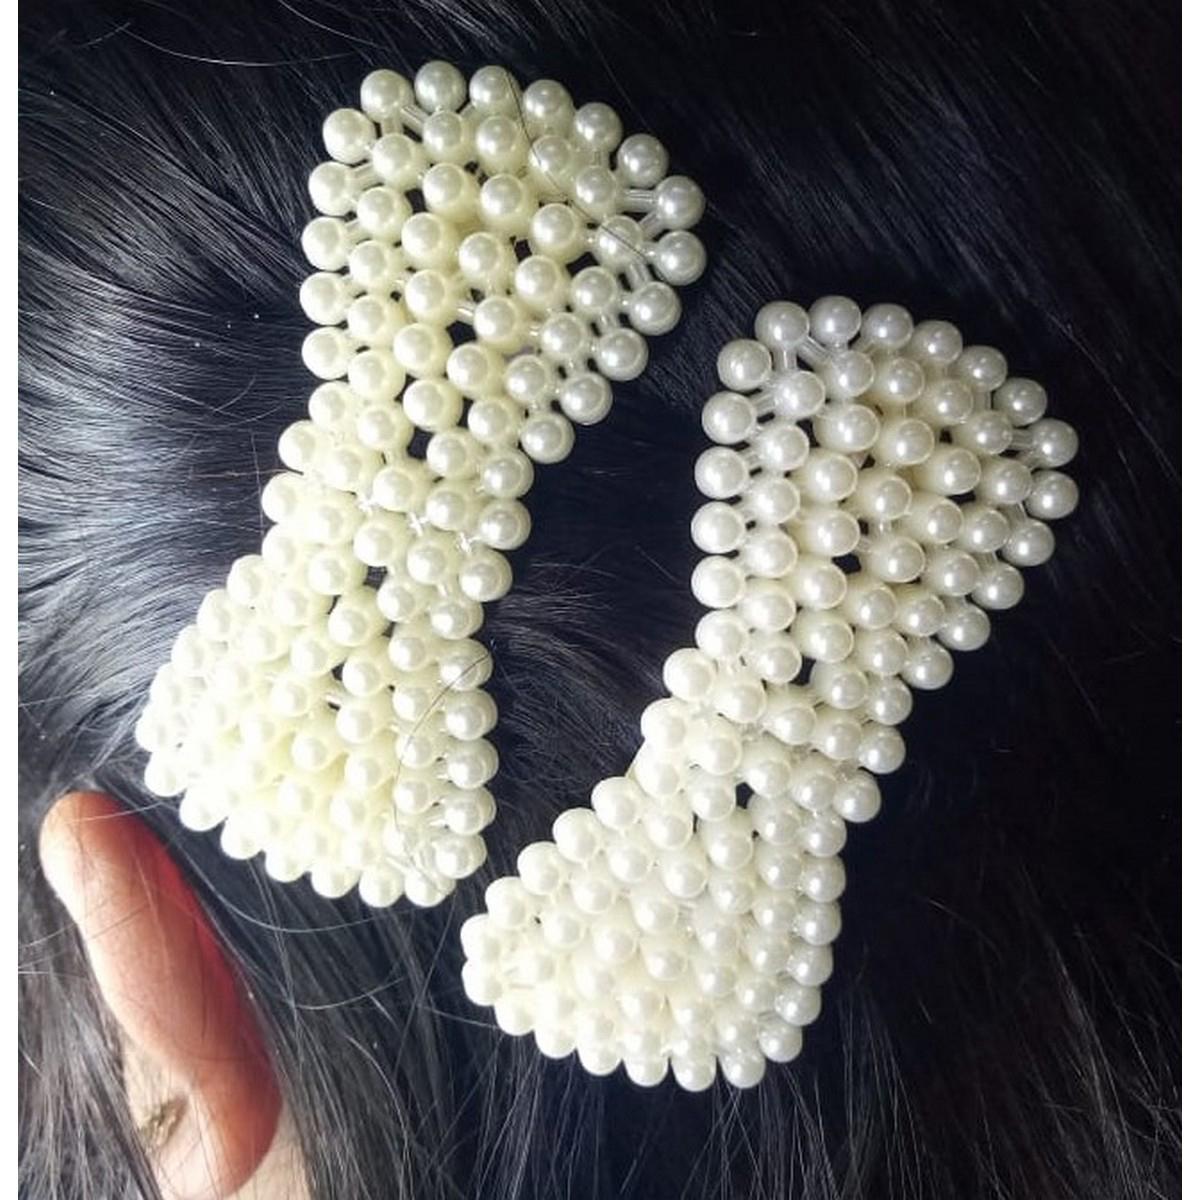 2 Pieces of Fancy Pearl Hair Clips and Pearl Hair Accessories for Women  Girls and Kids